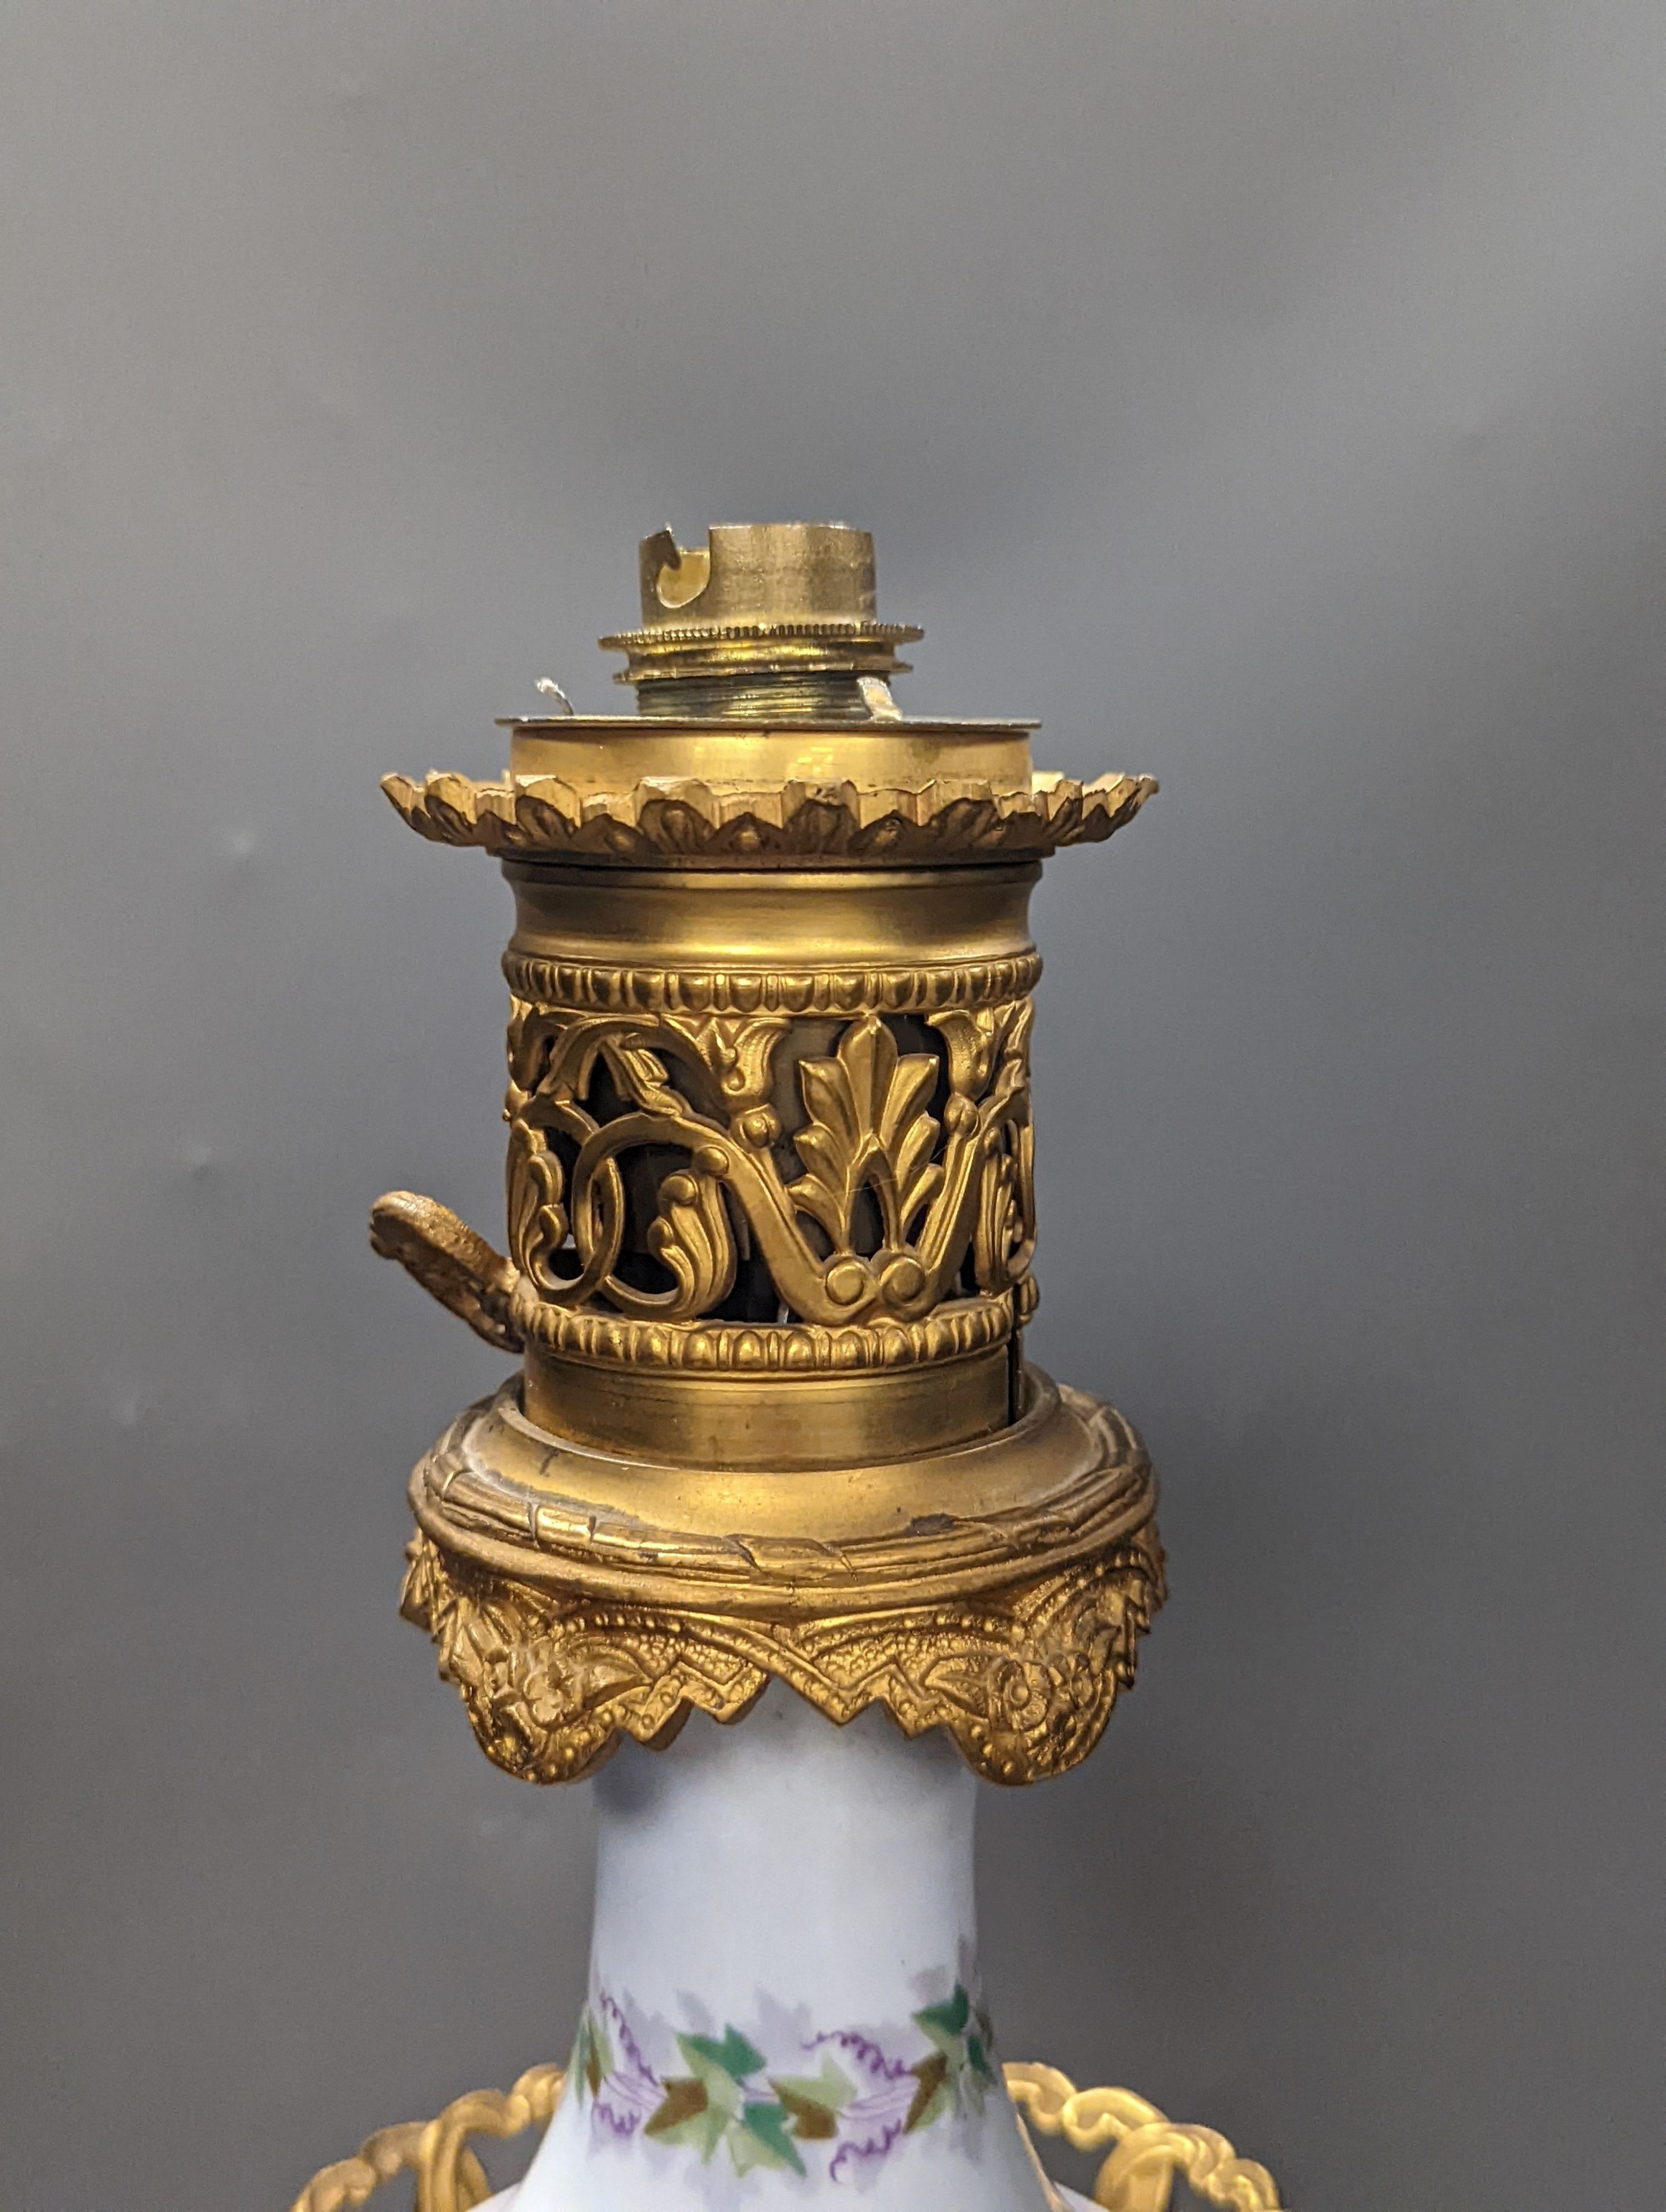 A French 19th century porcelain and ormolu oil lamp (later converted to an eclectic lamp), 54 cms high.